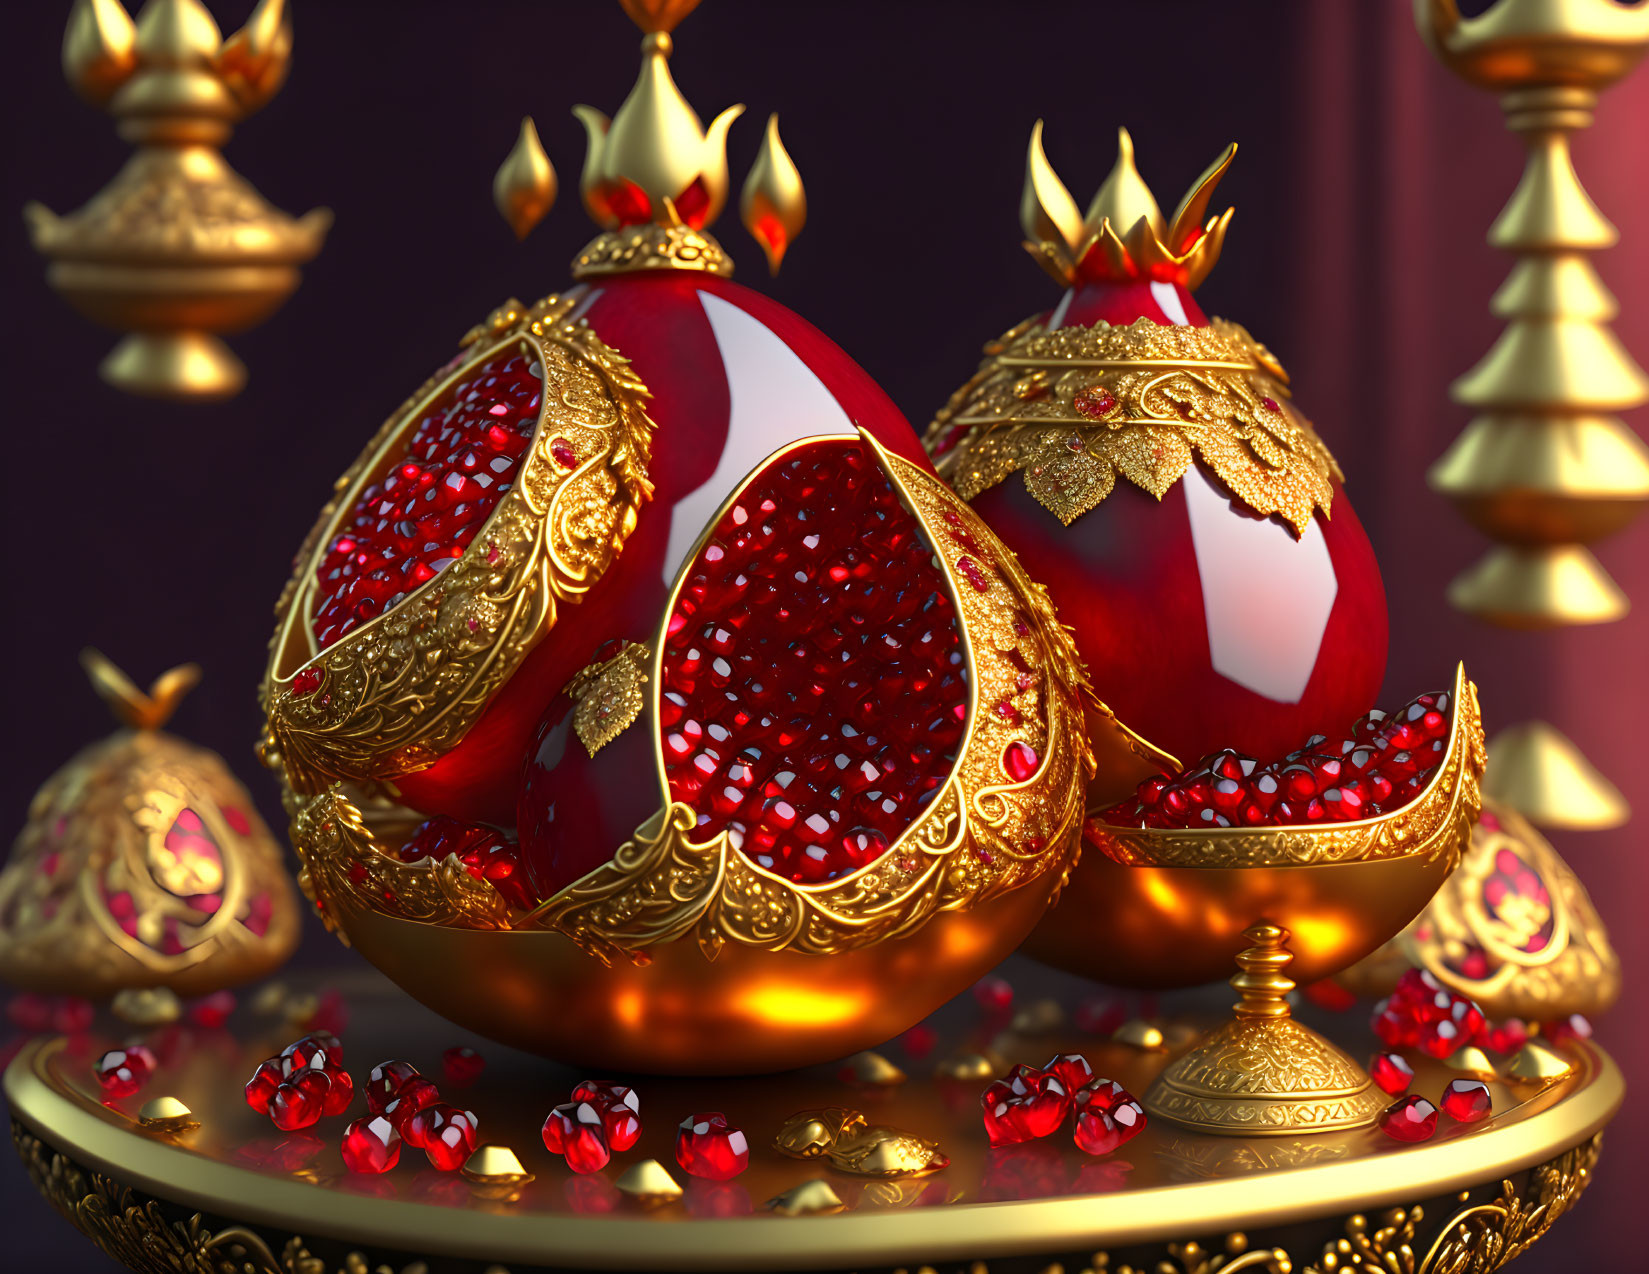 Exquisite red and gold Fabergé eggs on ornate golden tray